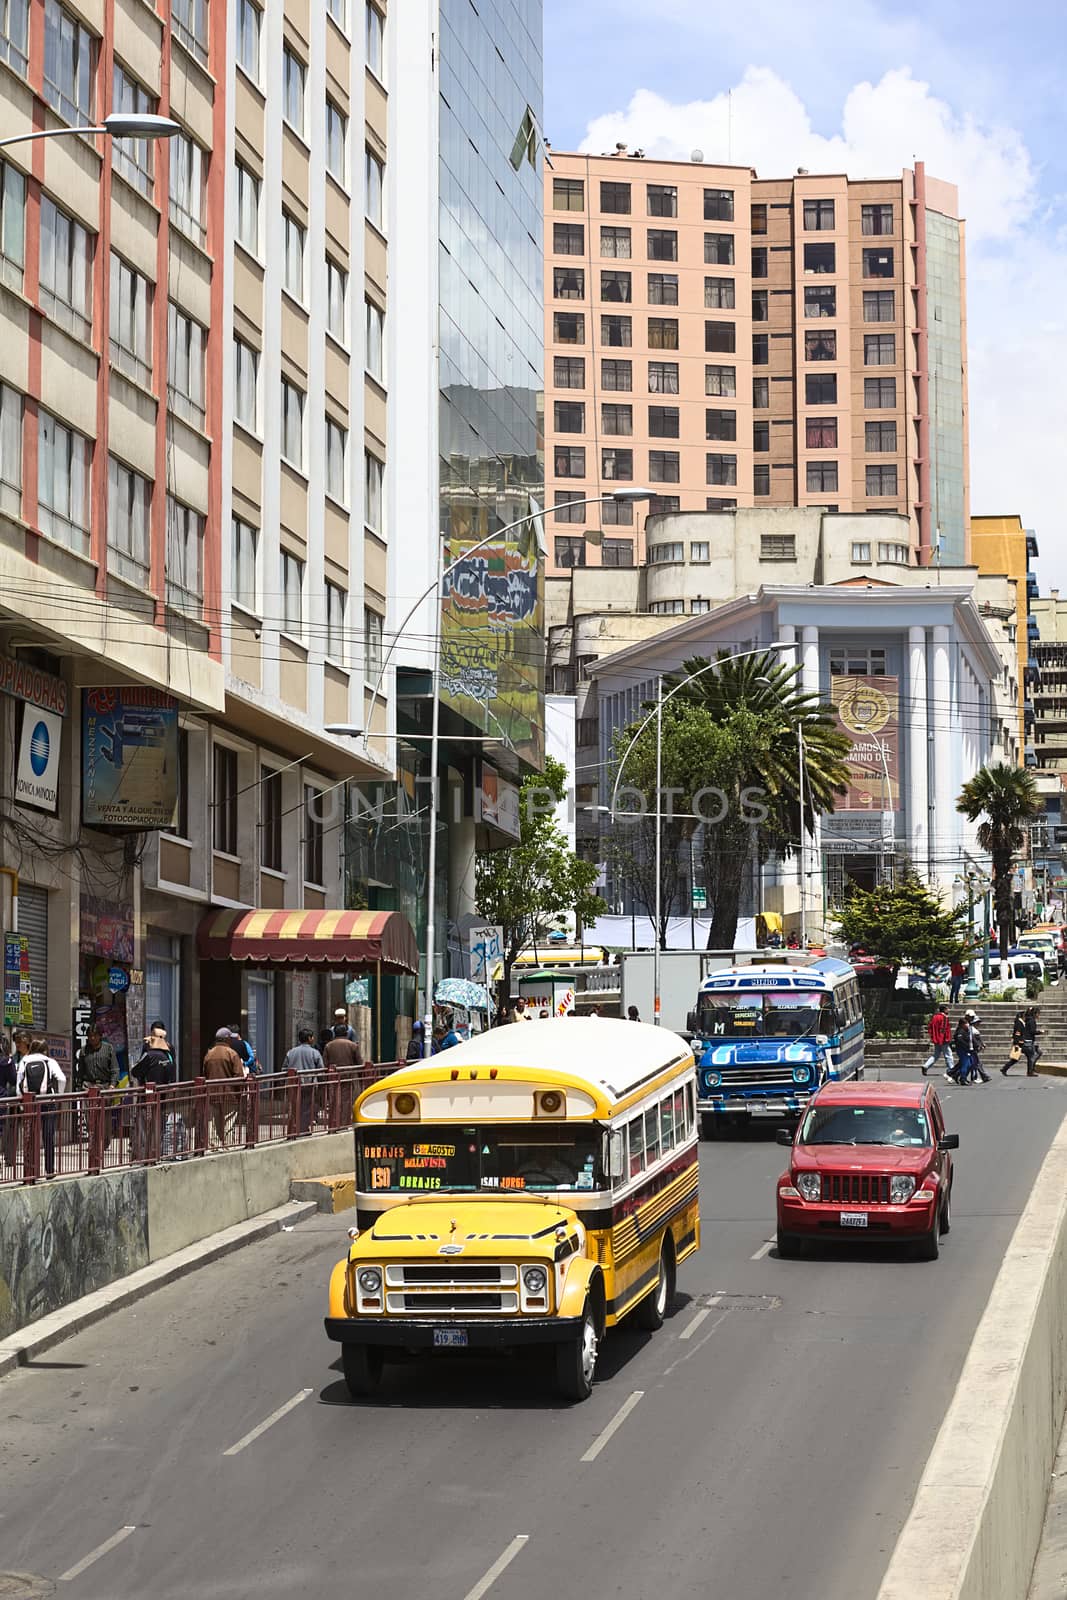 LA PAZ, BOLIVIA - NOVEMBER 28, 2014: Old Chevrolet buses used for public transport and a new Jeep on Villazon Avenue with the Plaza del Estudiante (Student's Square) in the back in the city center on November 28, 2014 in La Paz, Bolivia 